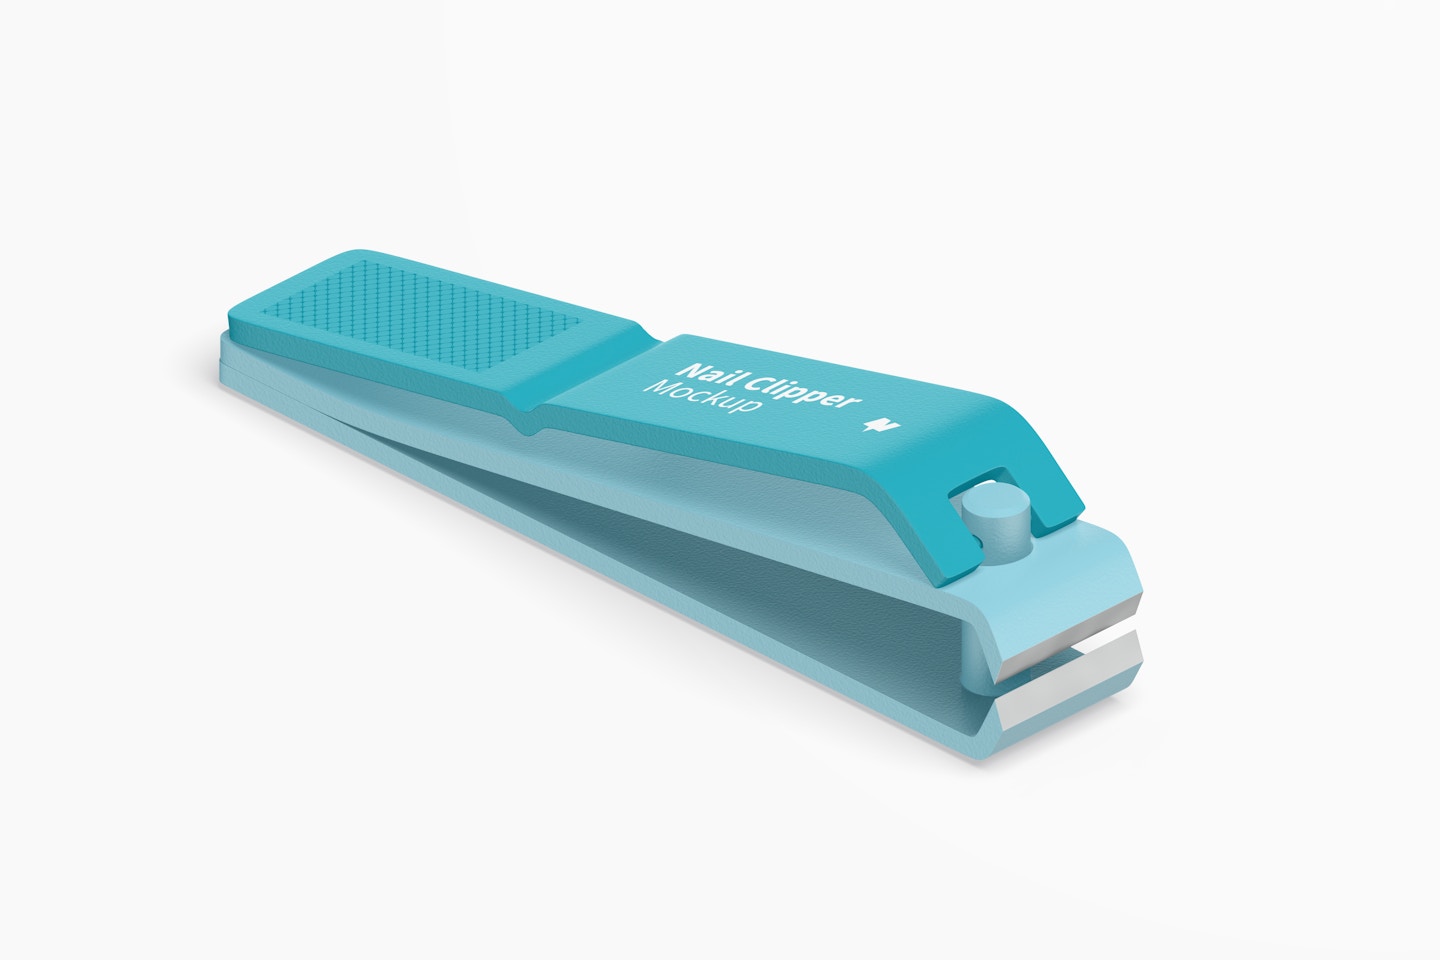 Nail Clipper Mockup, Isometric Left View